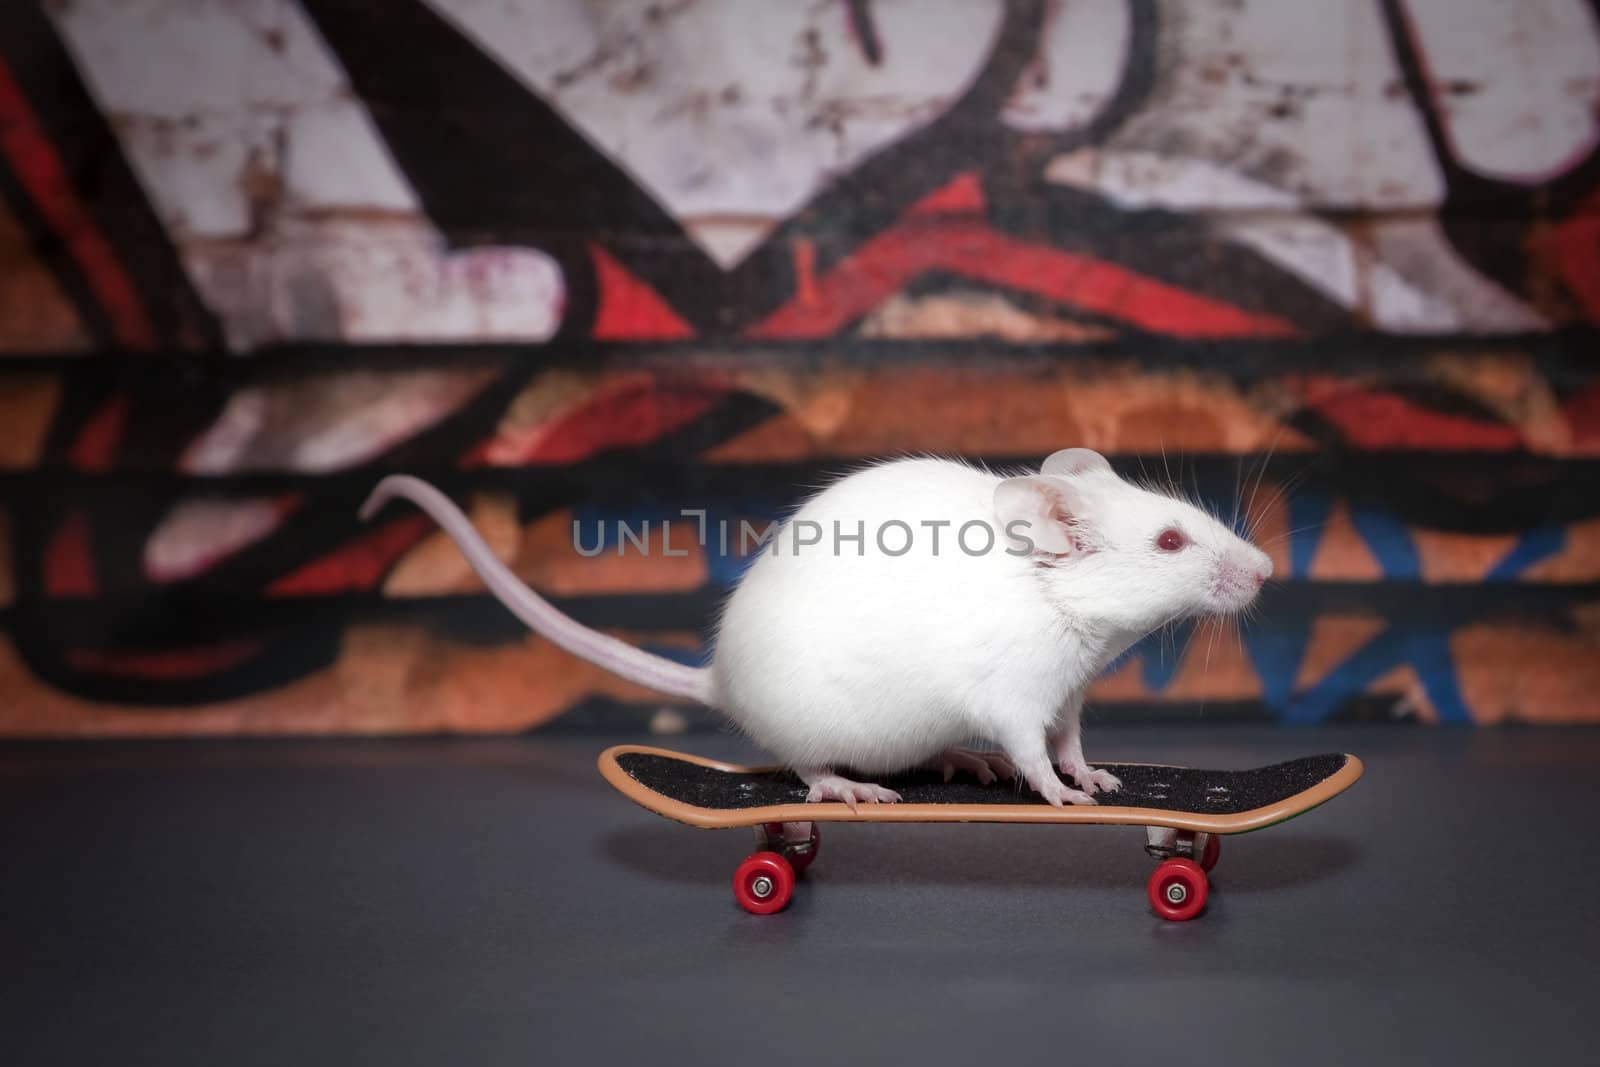 A small white mouse is skateboarding in the street.